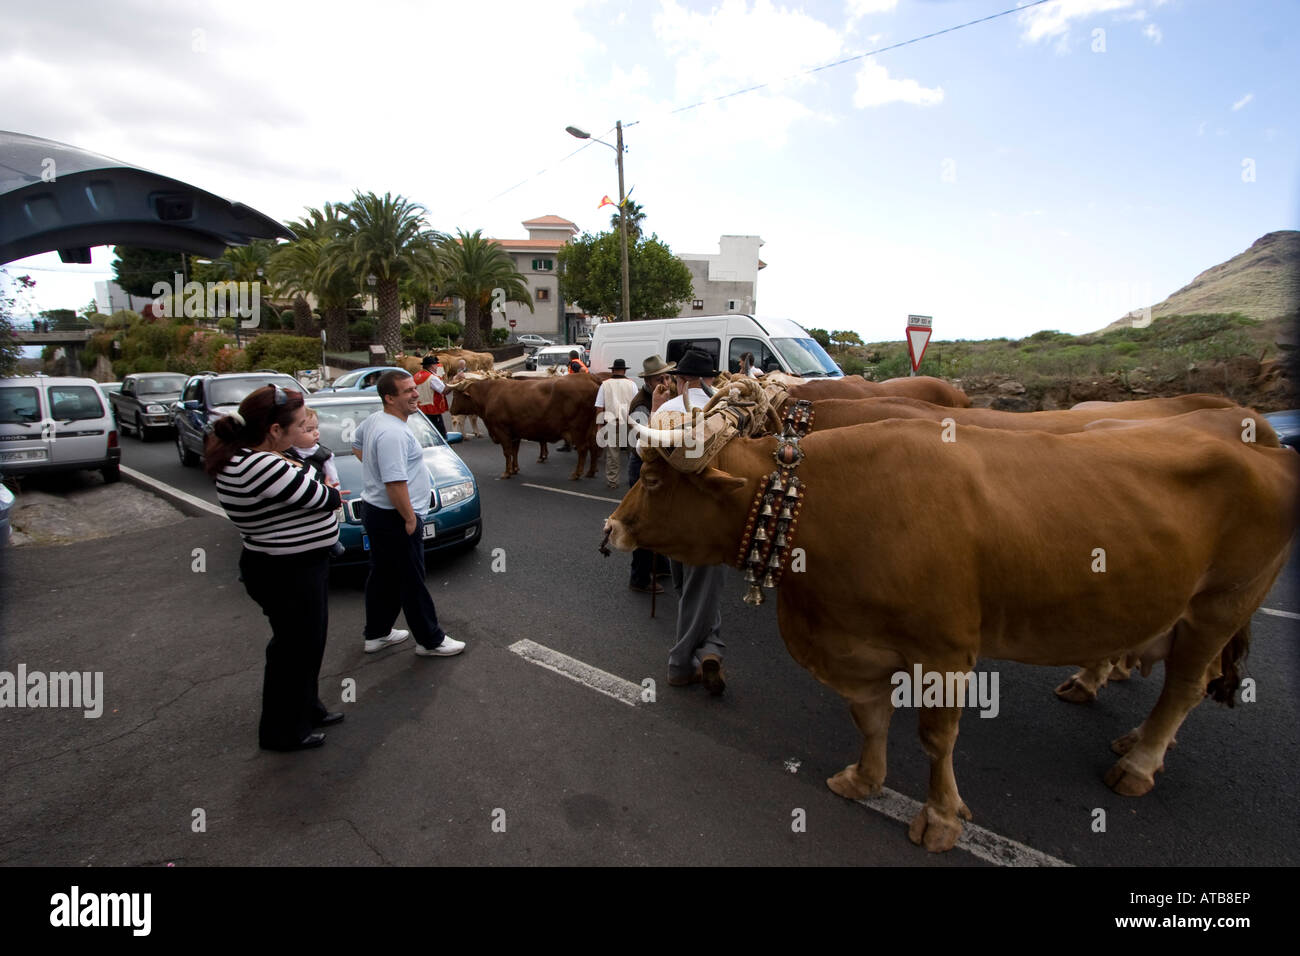 Oxen cause traffic chaos tenerife canary islands. Photo by Nikki Attree Stock Photo